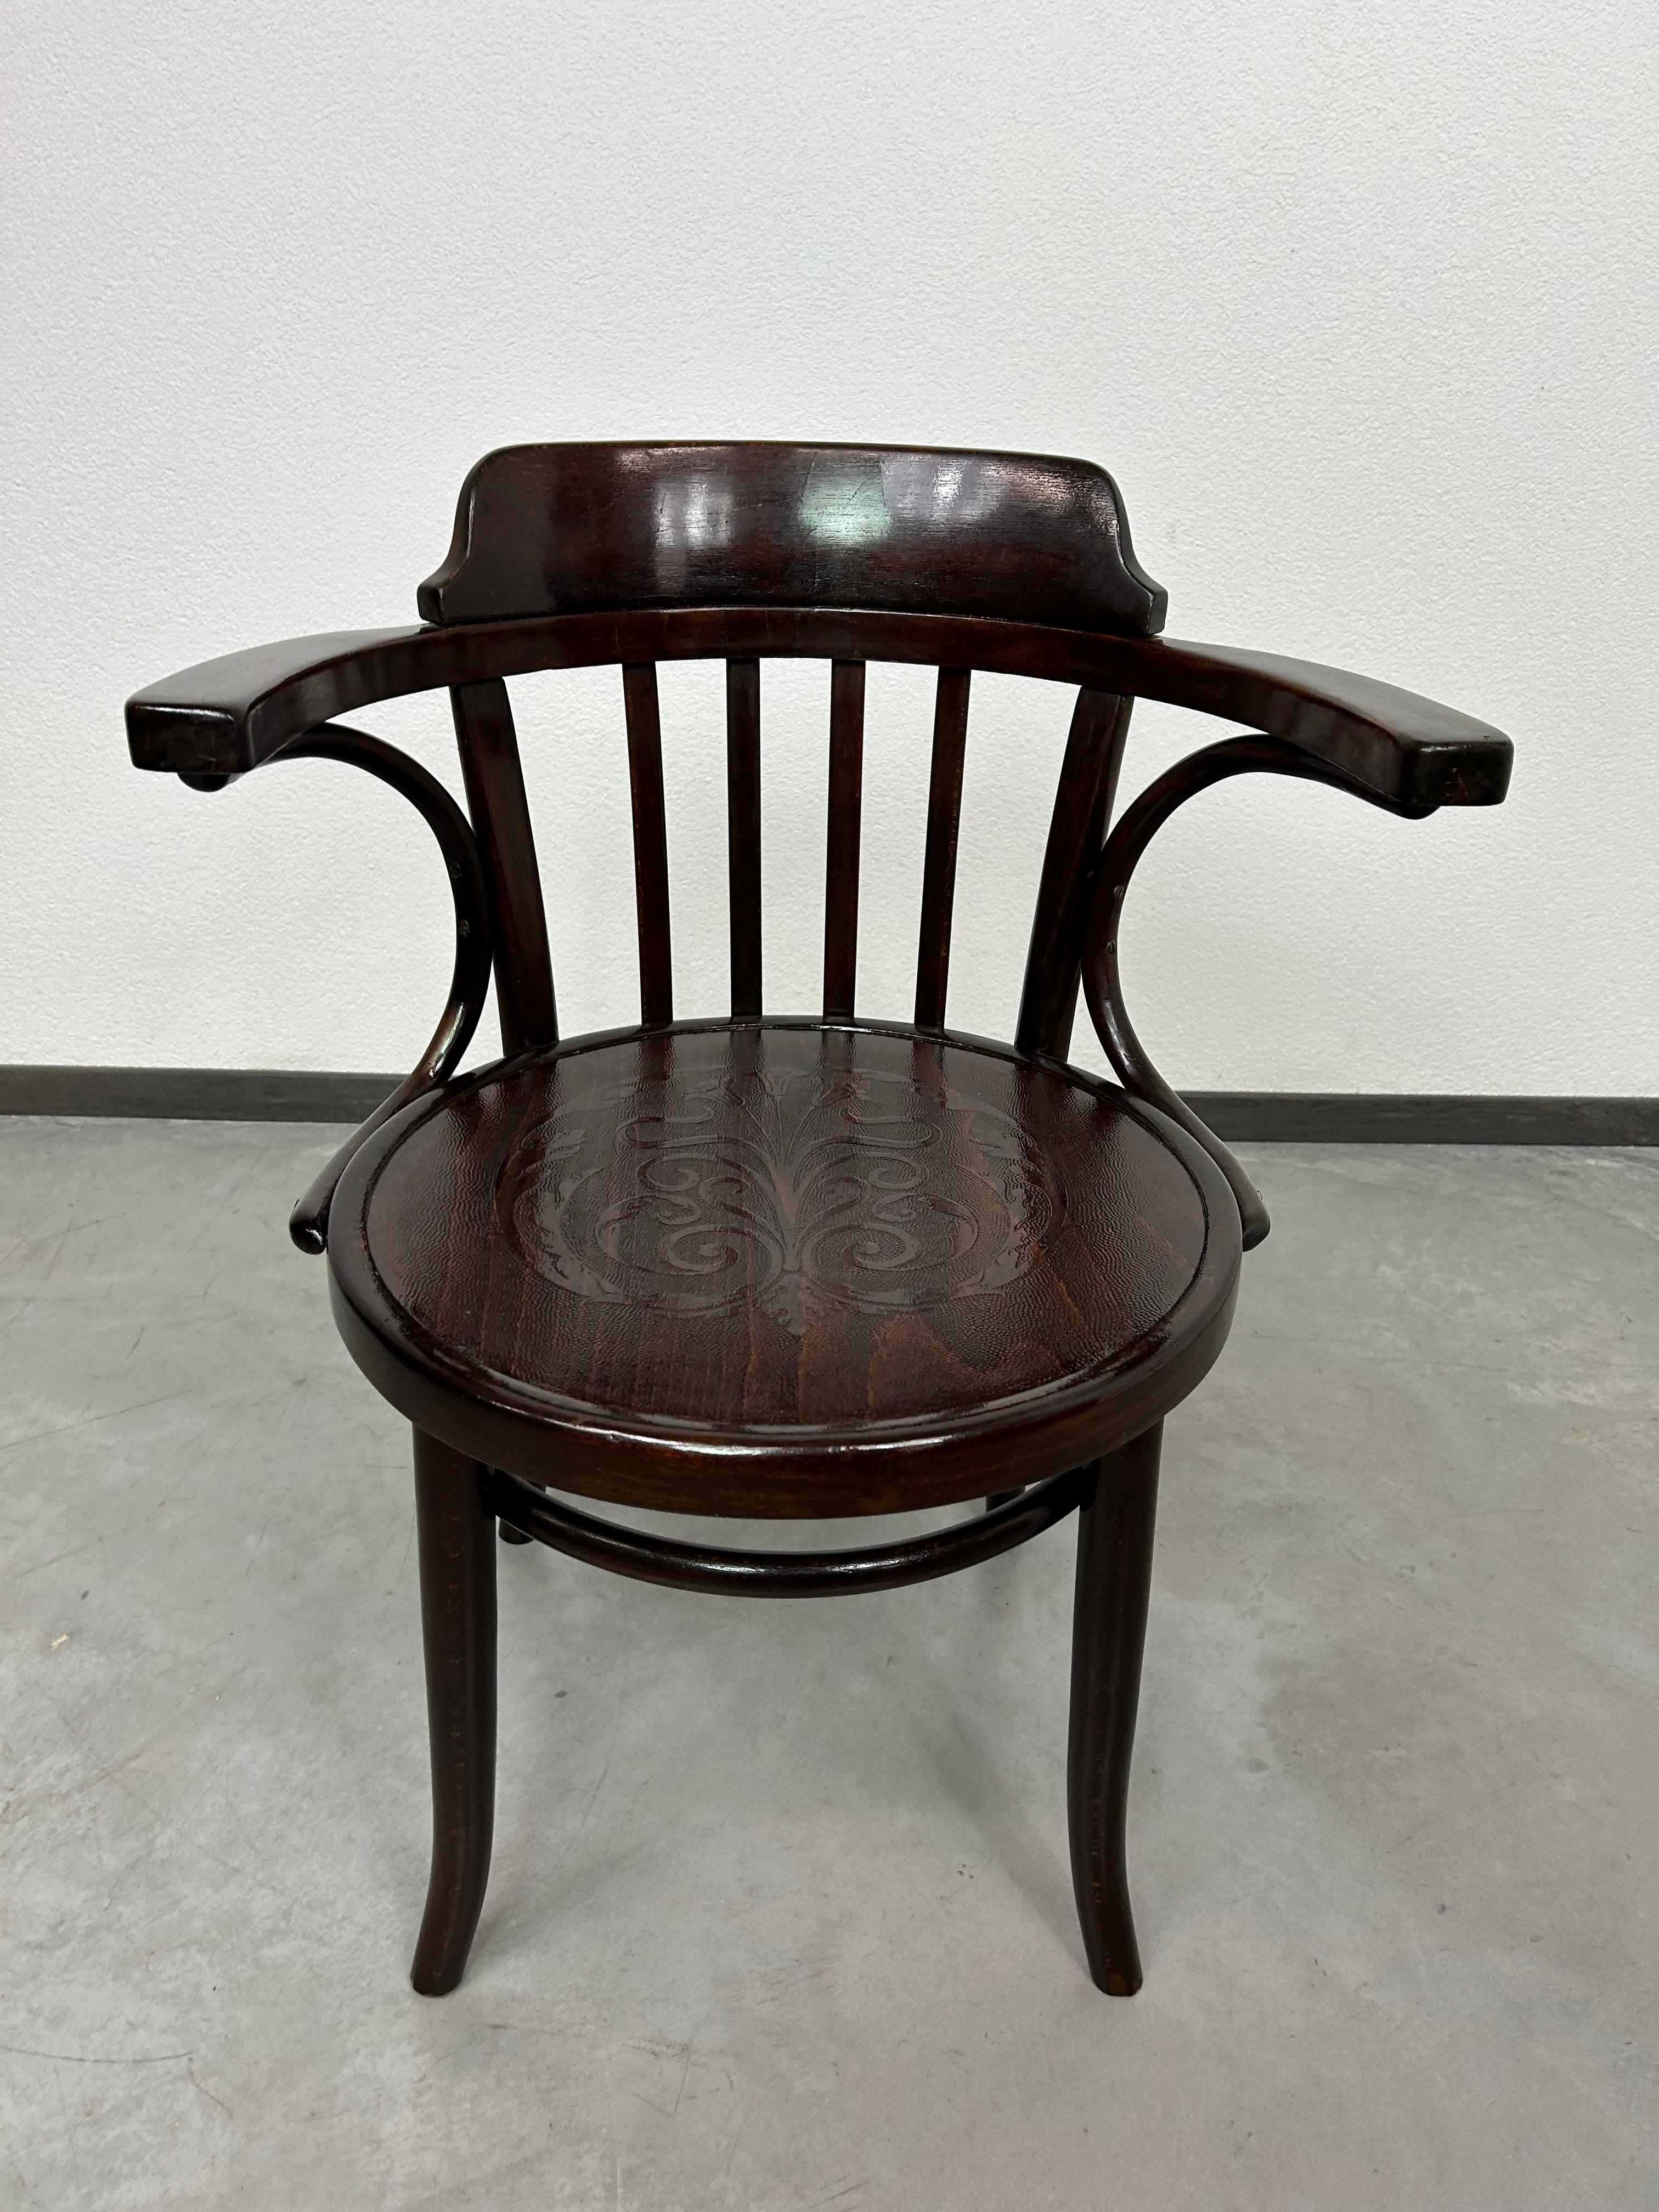 Jugendstil desk chair by Thonet professionally stained and repolished.